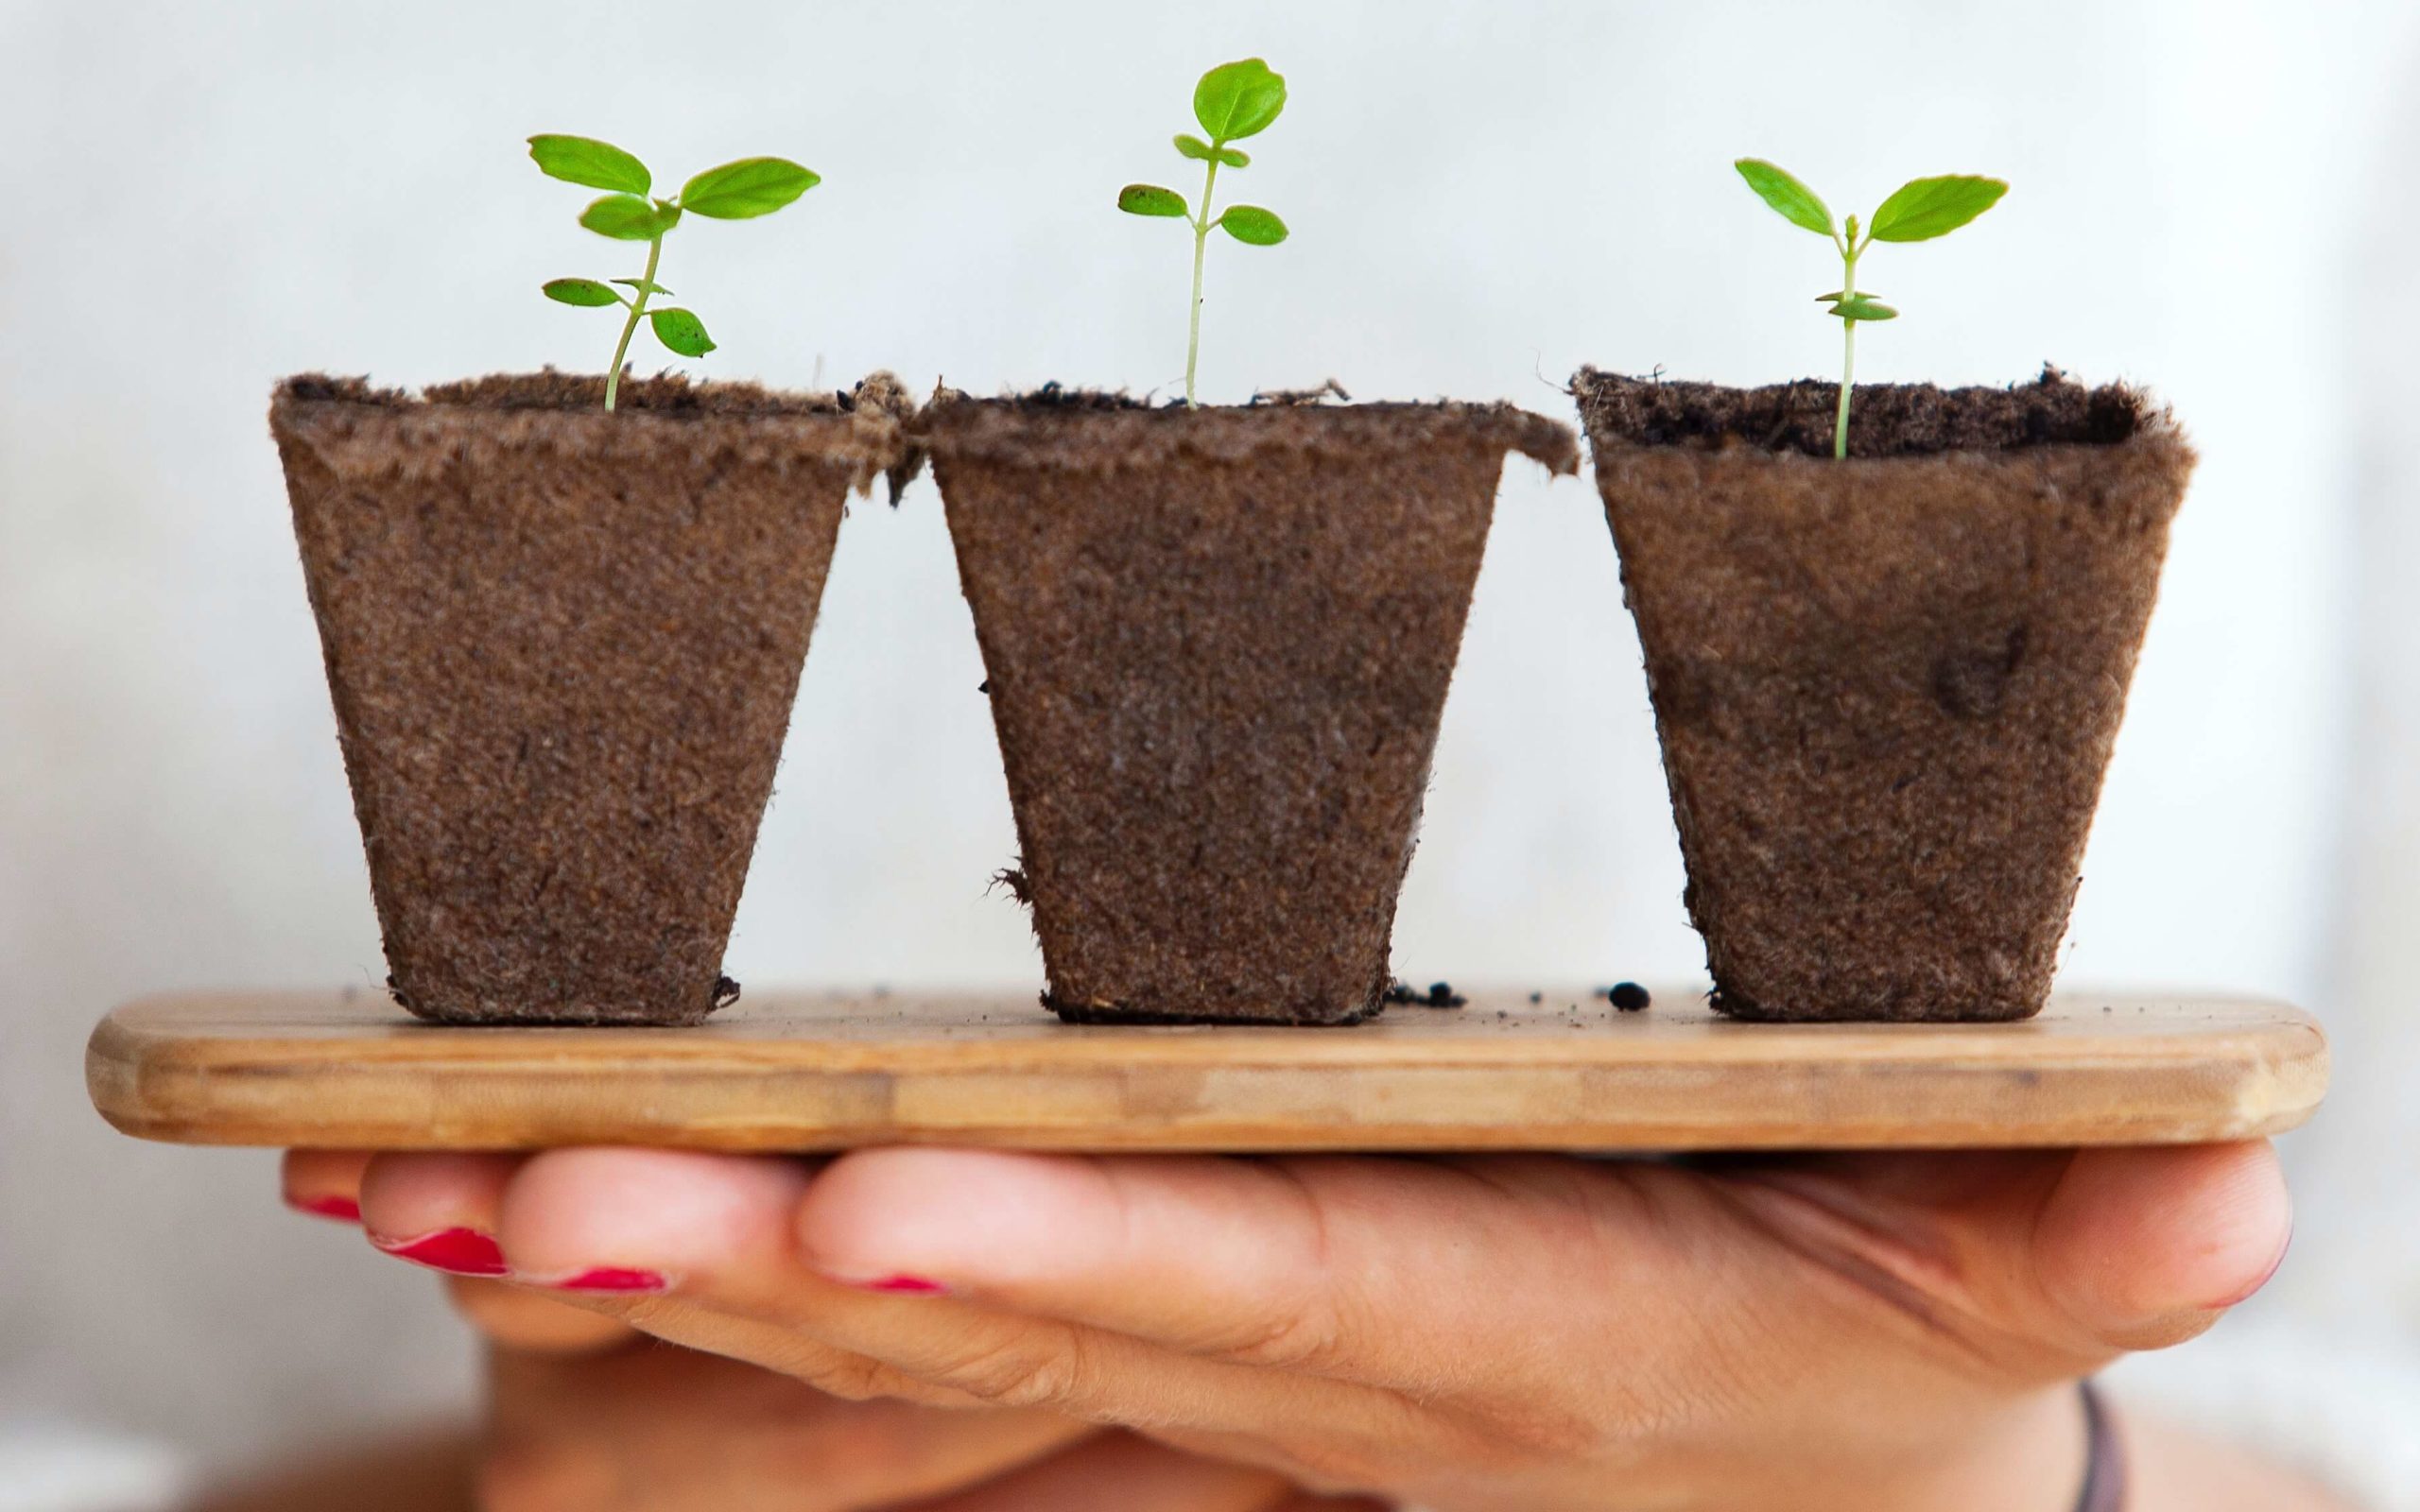 three seedlings on a tray in the hands of a woman, representing adding value to your community